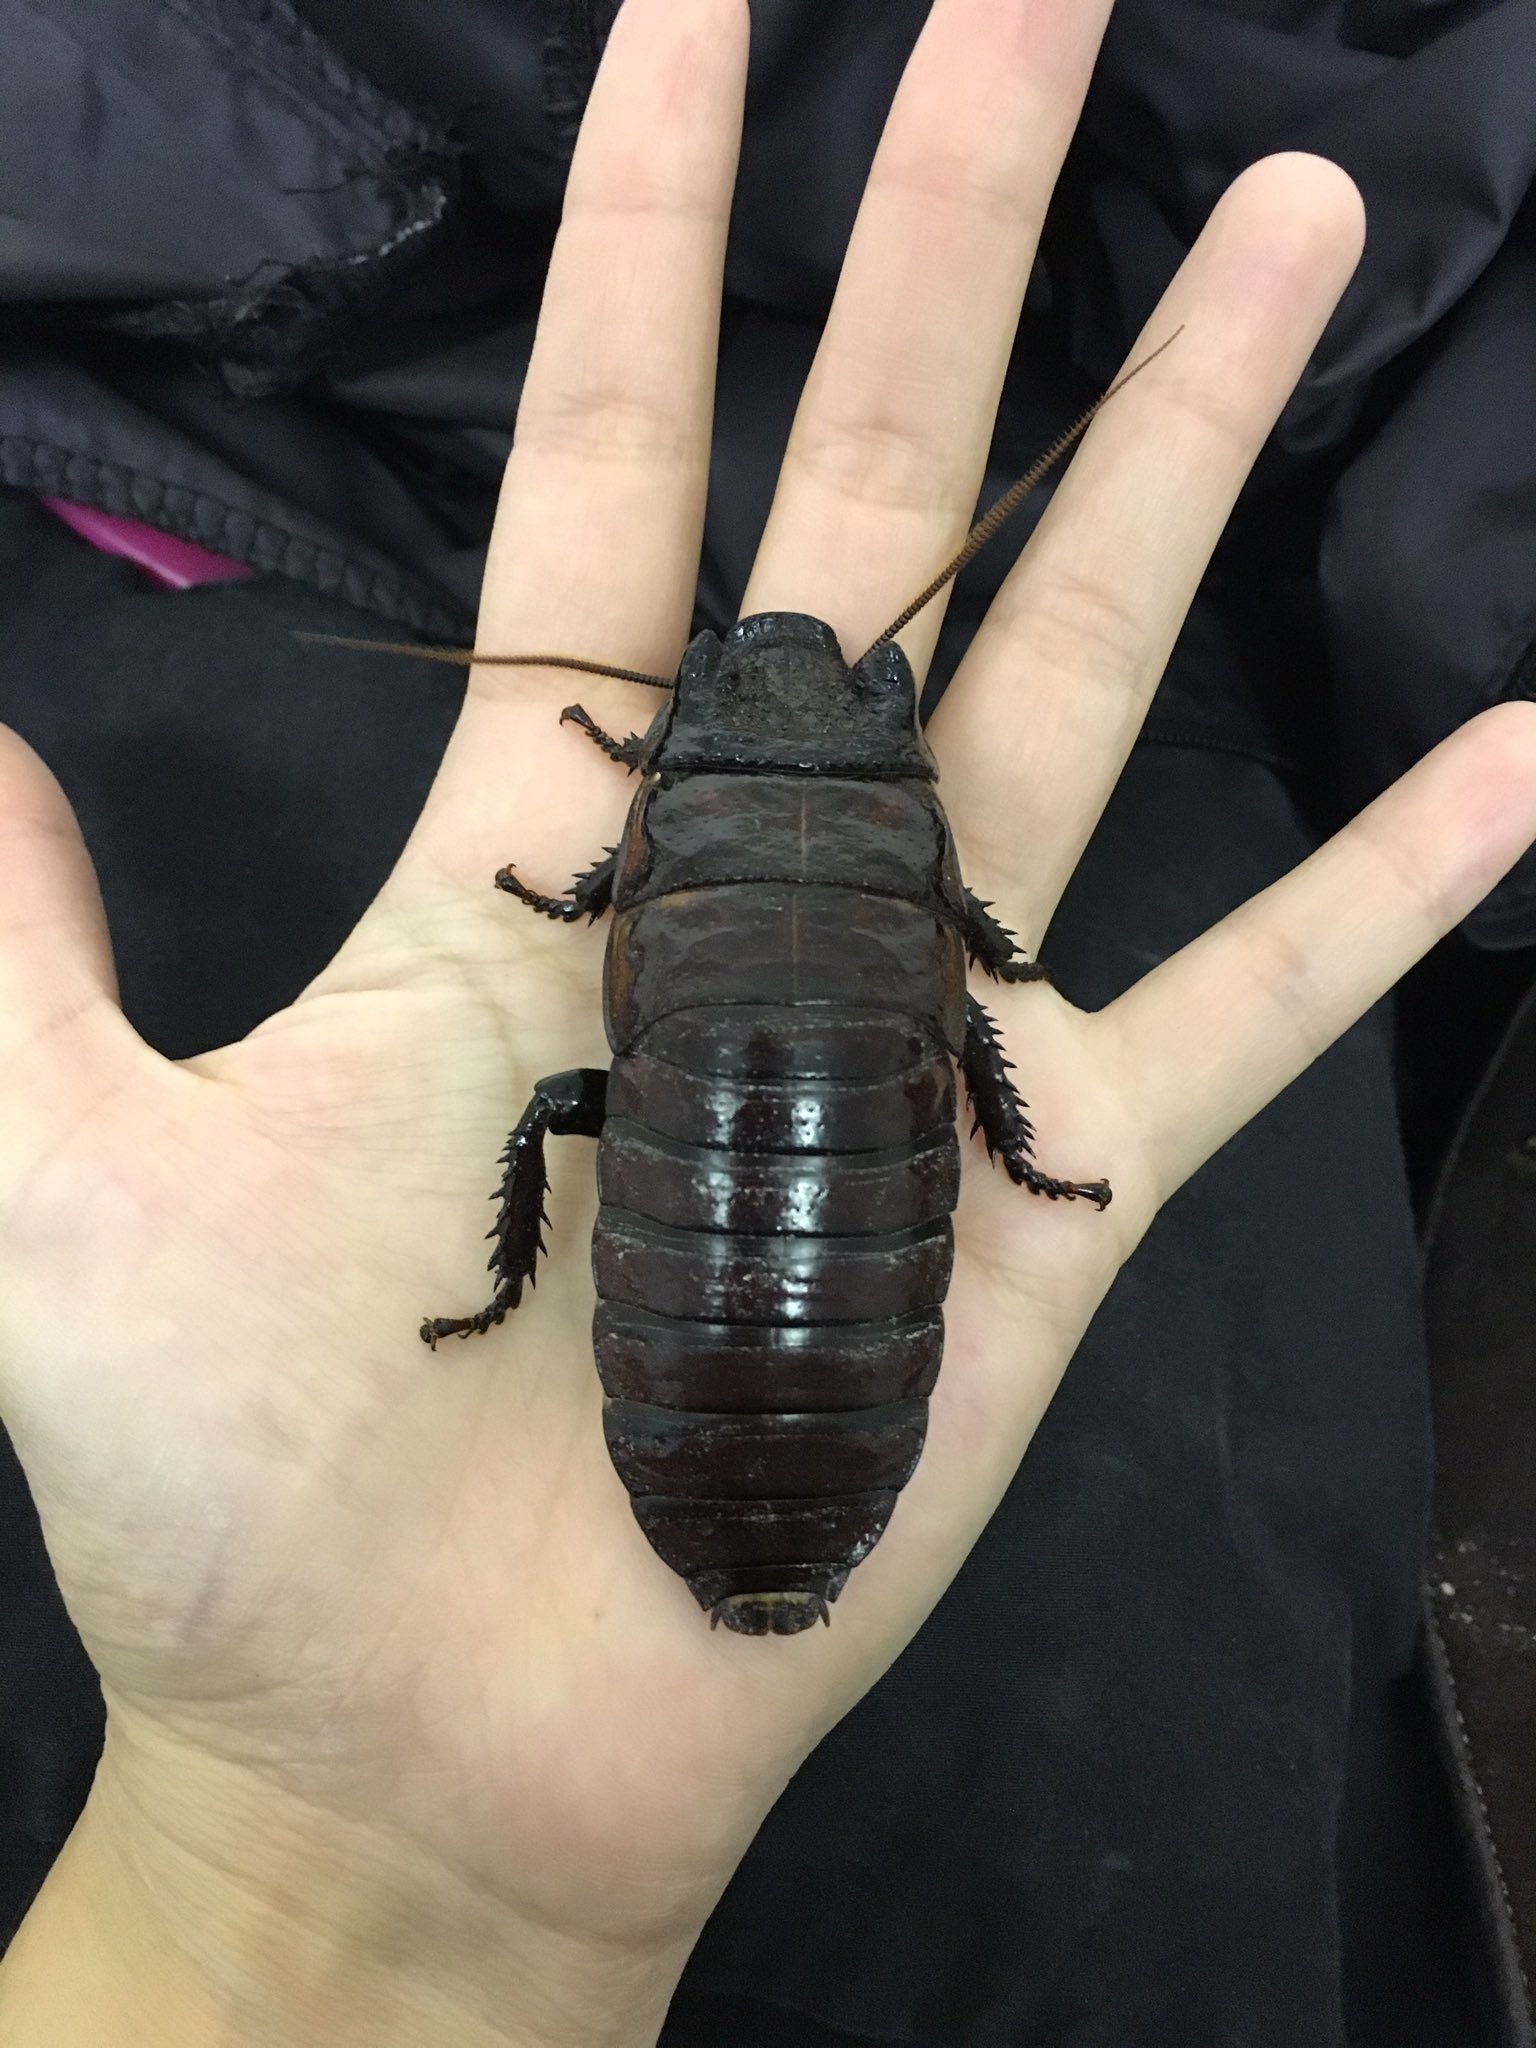 Emzotic A Twitter George The Madagascan Hissing Cockroach Representing Creepy Crawlies For A Halloween Celebration Today Halloween Cockroach Creepy Https T Co 1mdftmkr3o